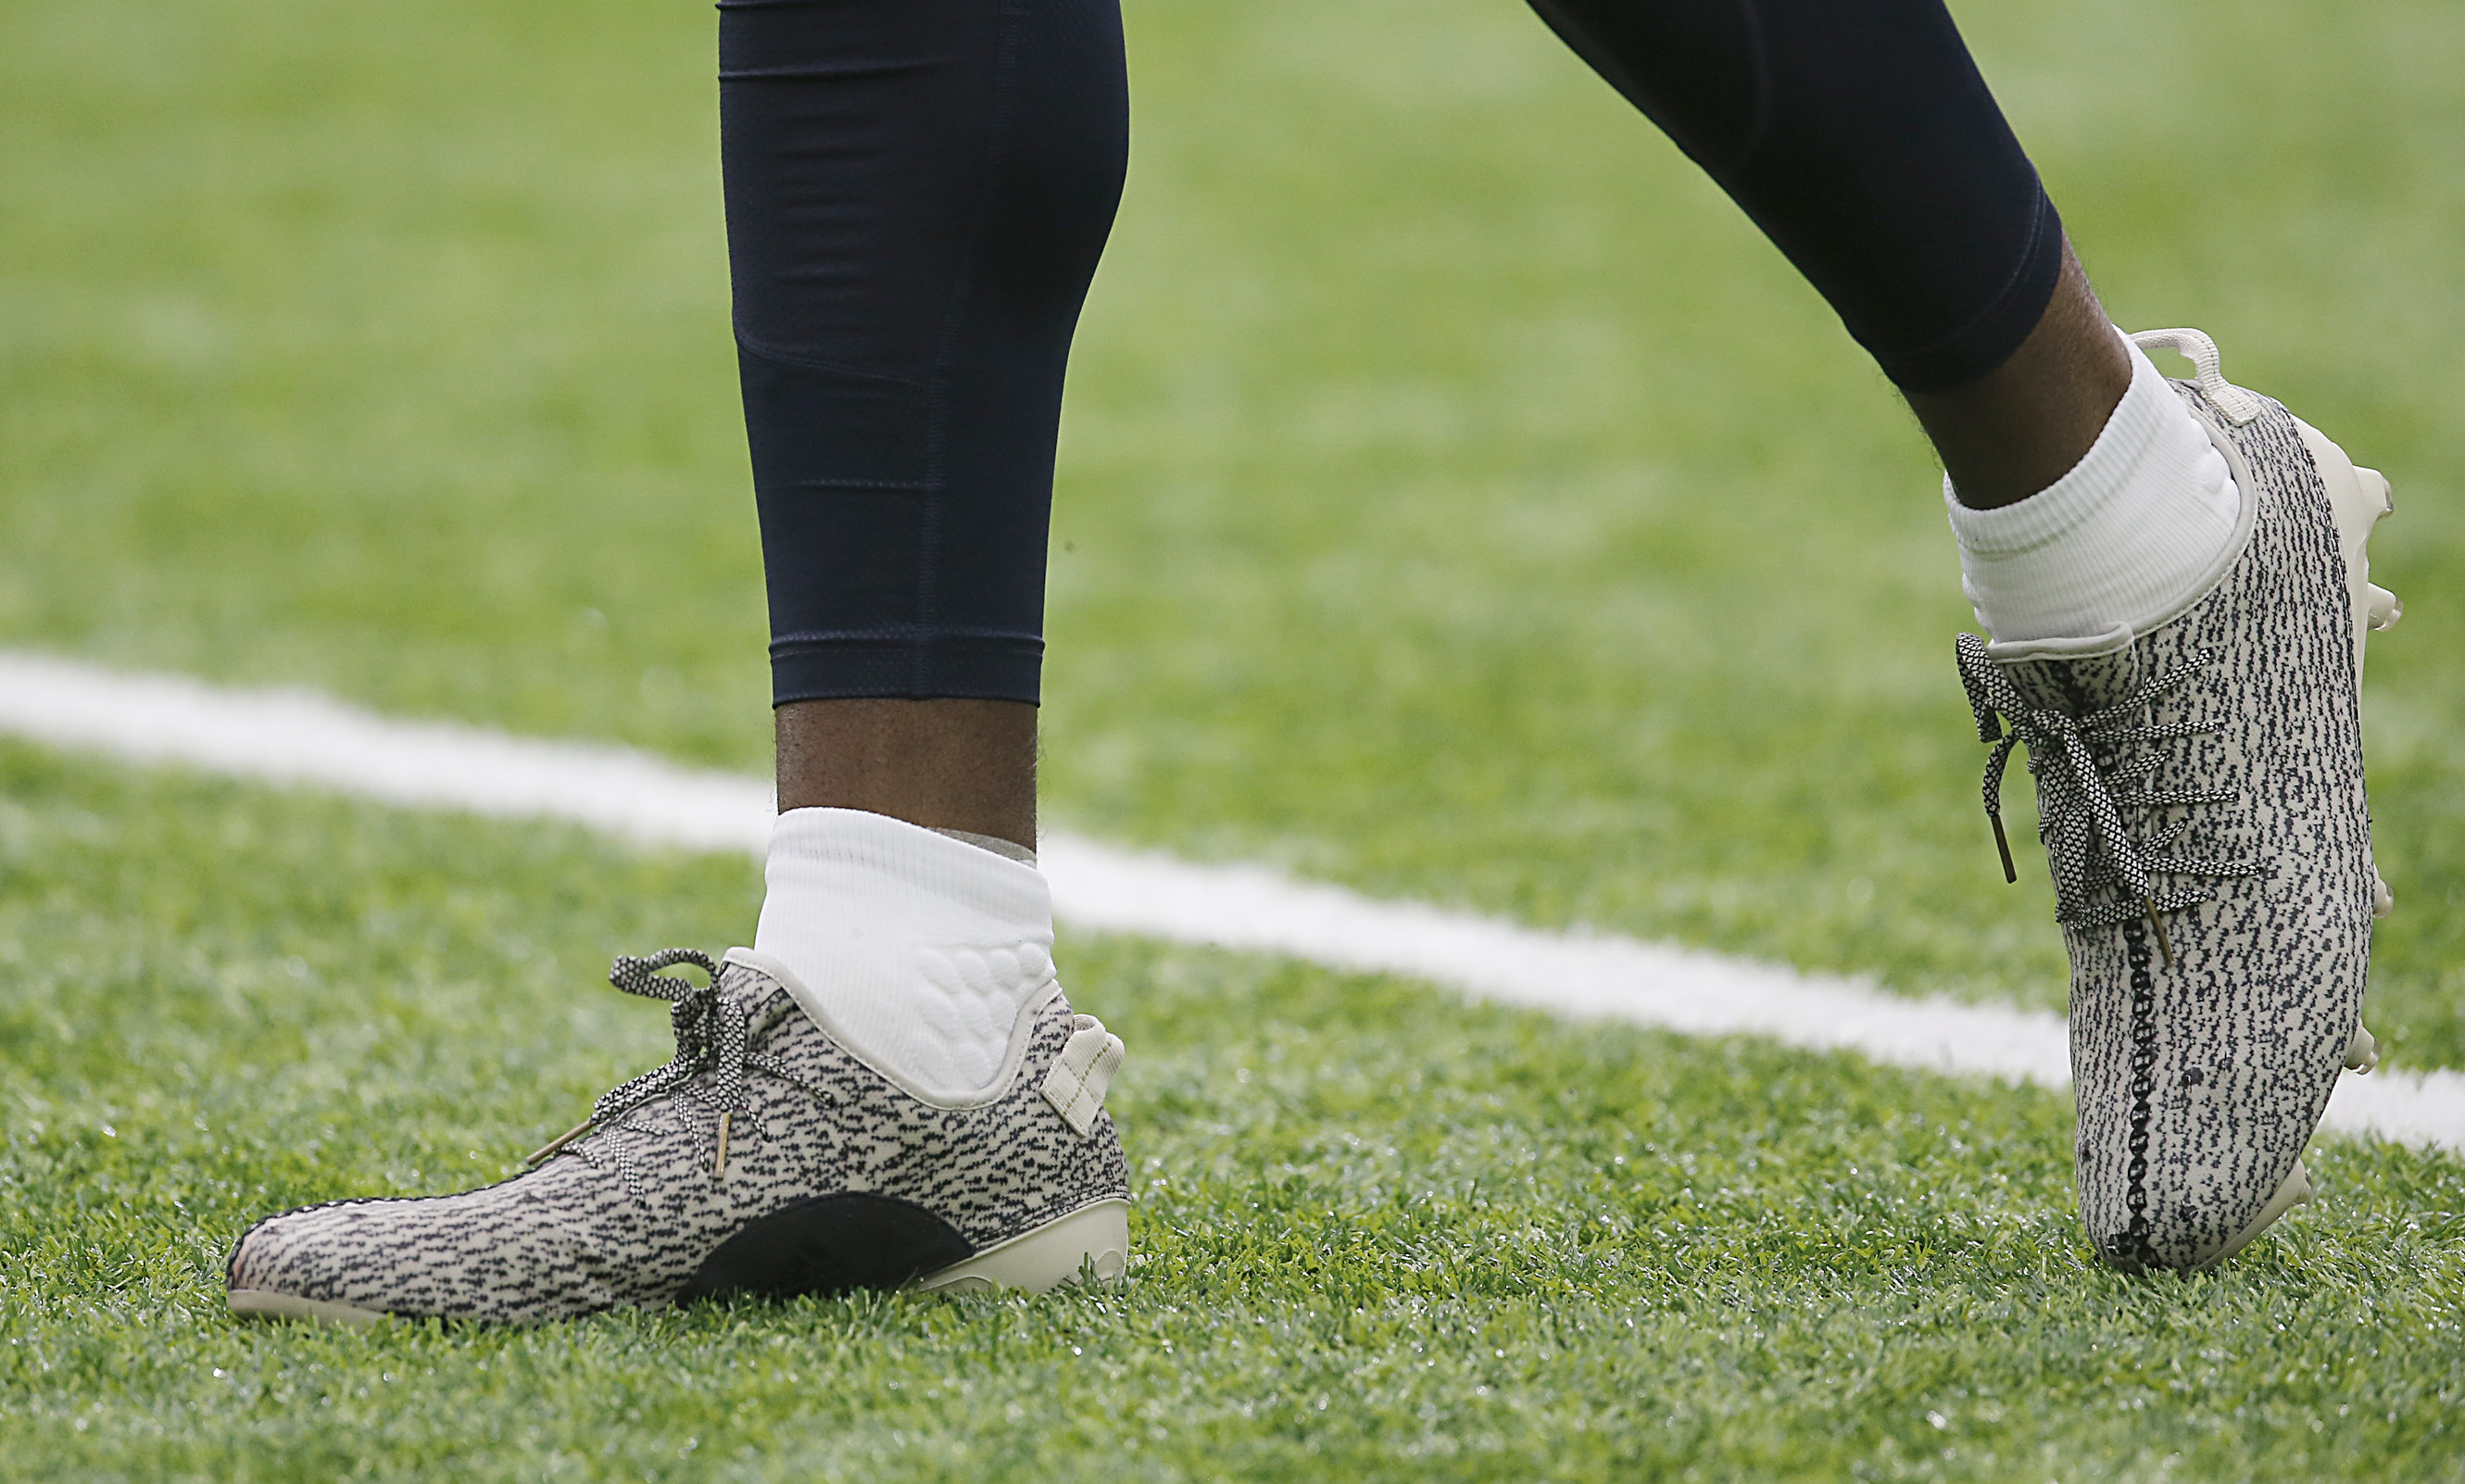 Birma je bent Spanning The NFL Banned Kanye West's adidas Yeezy Cleats | Complex